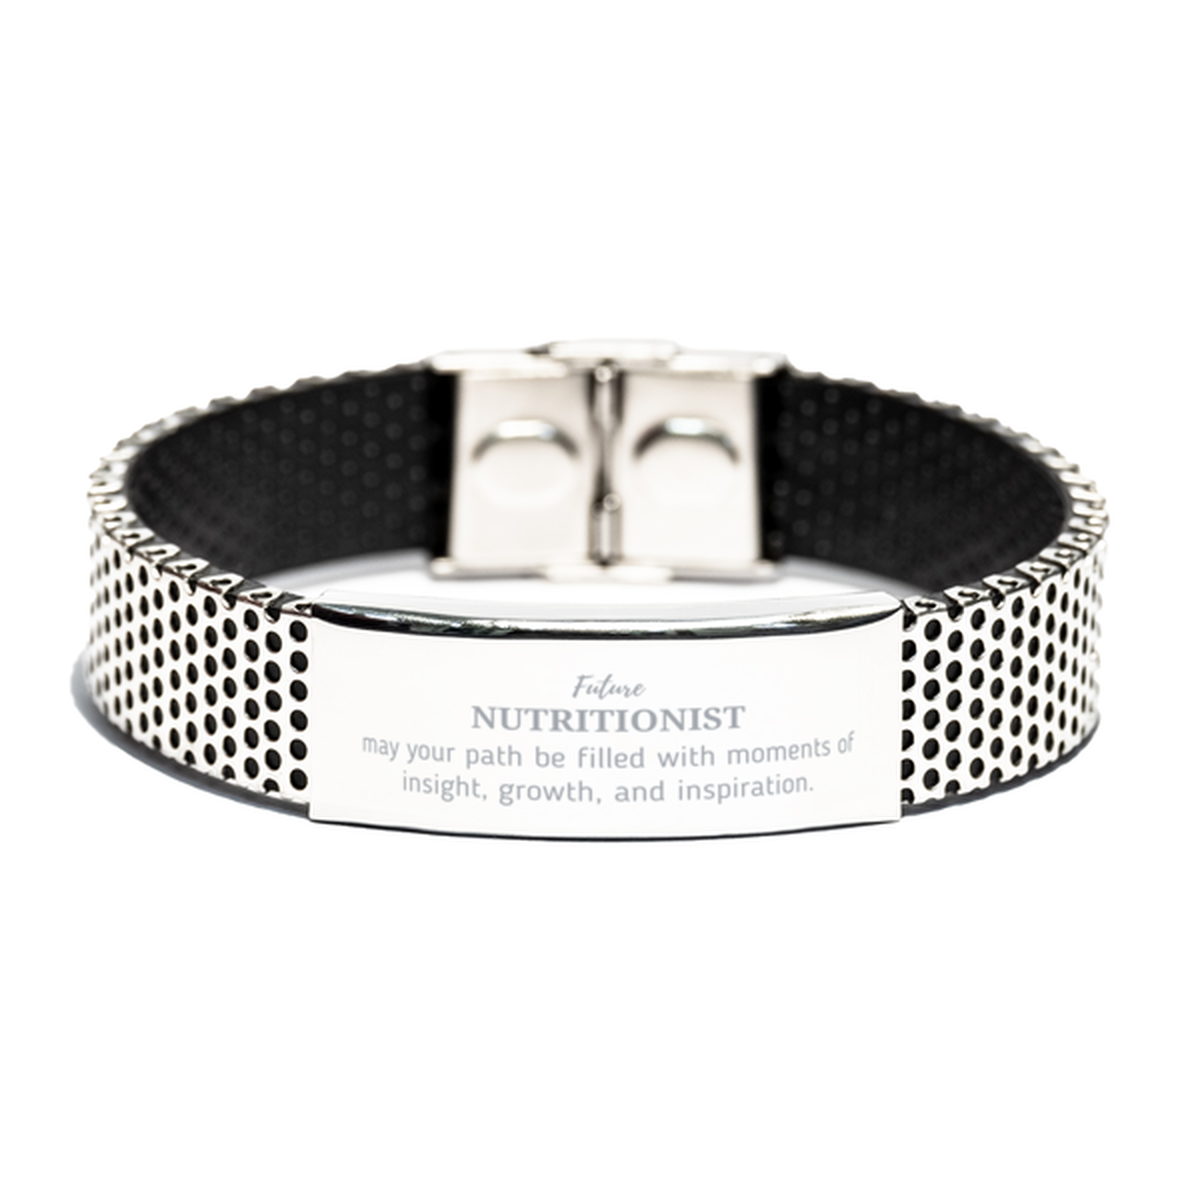 Future Nutritionist Gifts, May your path be filled with moments of insight, Graduation Gifts for New Nutritionist, Christmas Unique Stainless Steel Bracelet For Men, Women, Friends